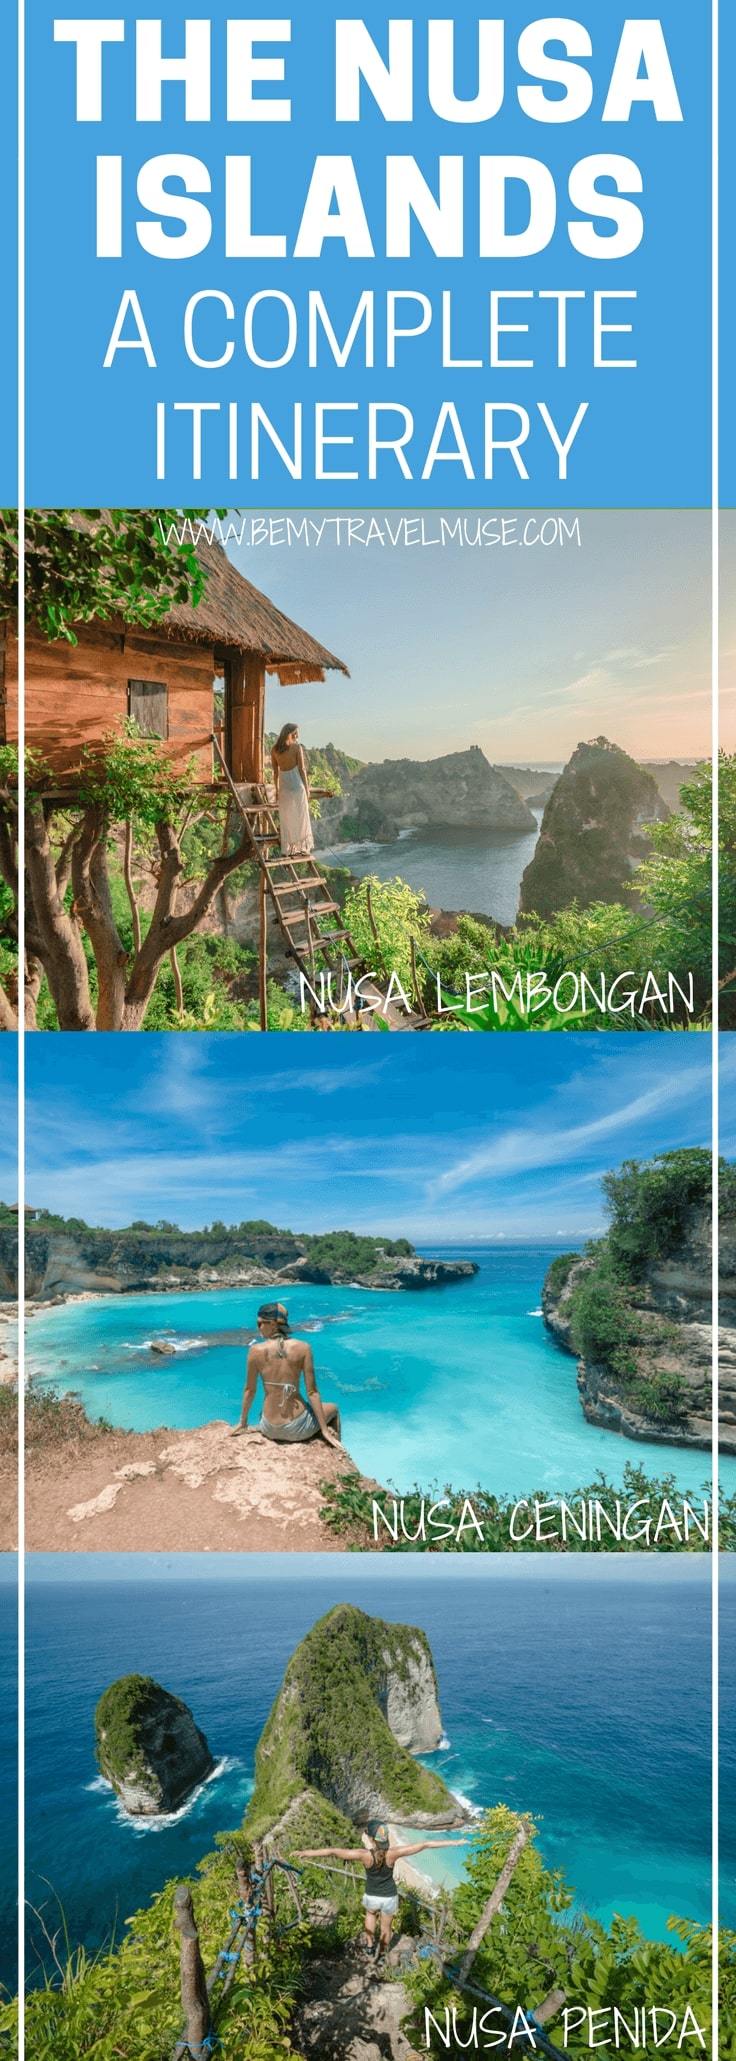 The ultimate guide to your trip in the Nusa Islands, Bali, Indonesia! A full itinerary that will help plan your trip, with all the best spots to see & go, accommodation and transportation tips! Be My Travel Muse | Nusa Lembongan | Nusa Penida | Nusa Ceningan | Blue Lagoon | Devil's Tear | Angel's Bilabong | Dream Beach | Kelingking Viewpoint | Bali travel tips | Indonesia travel tips